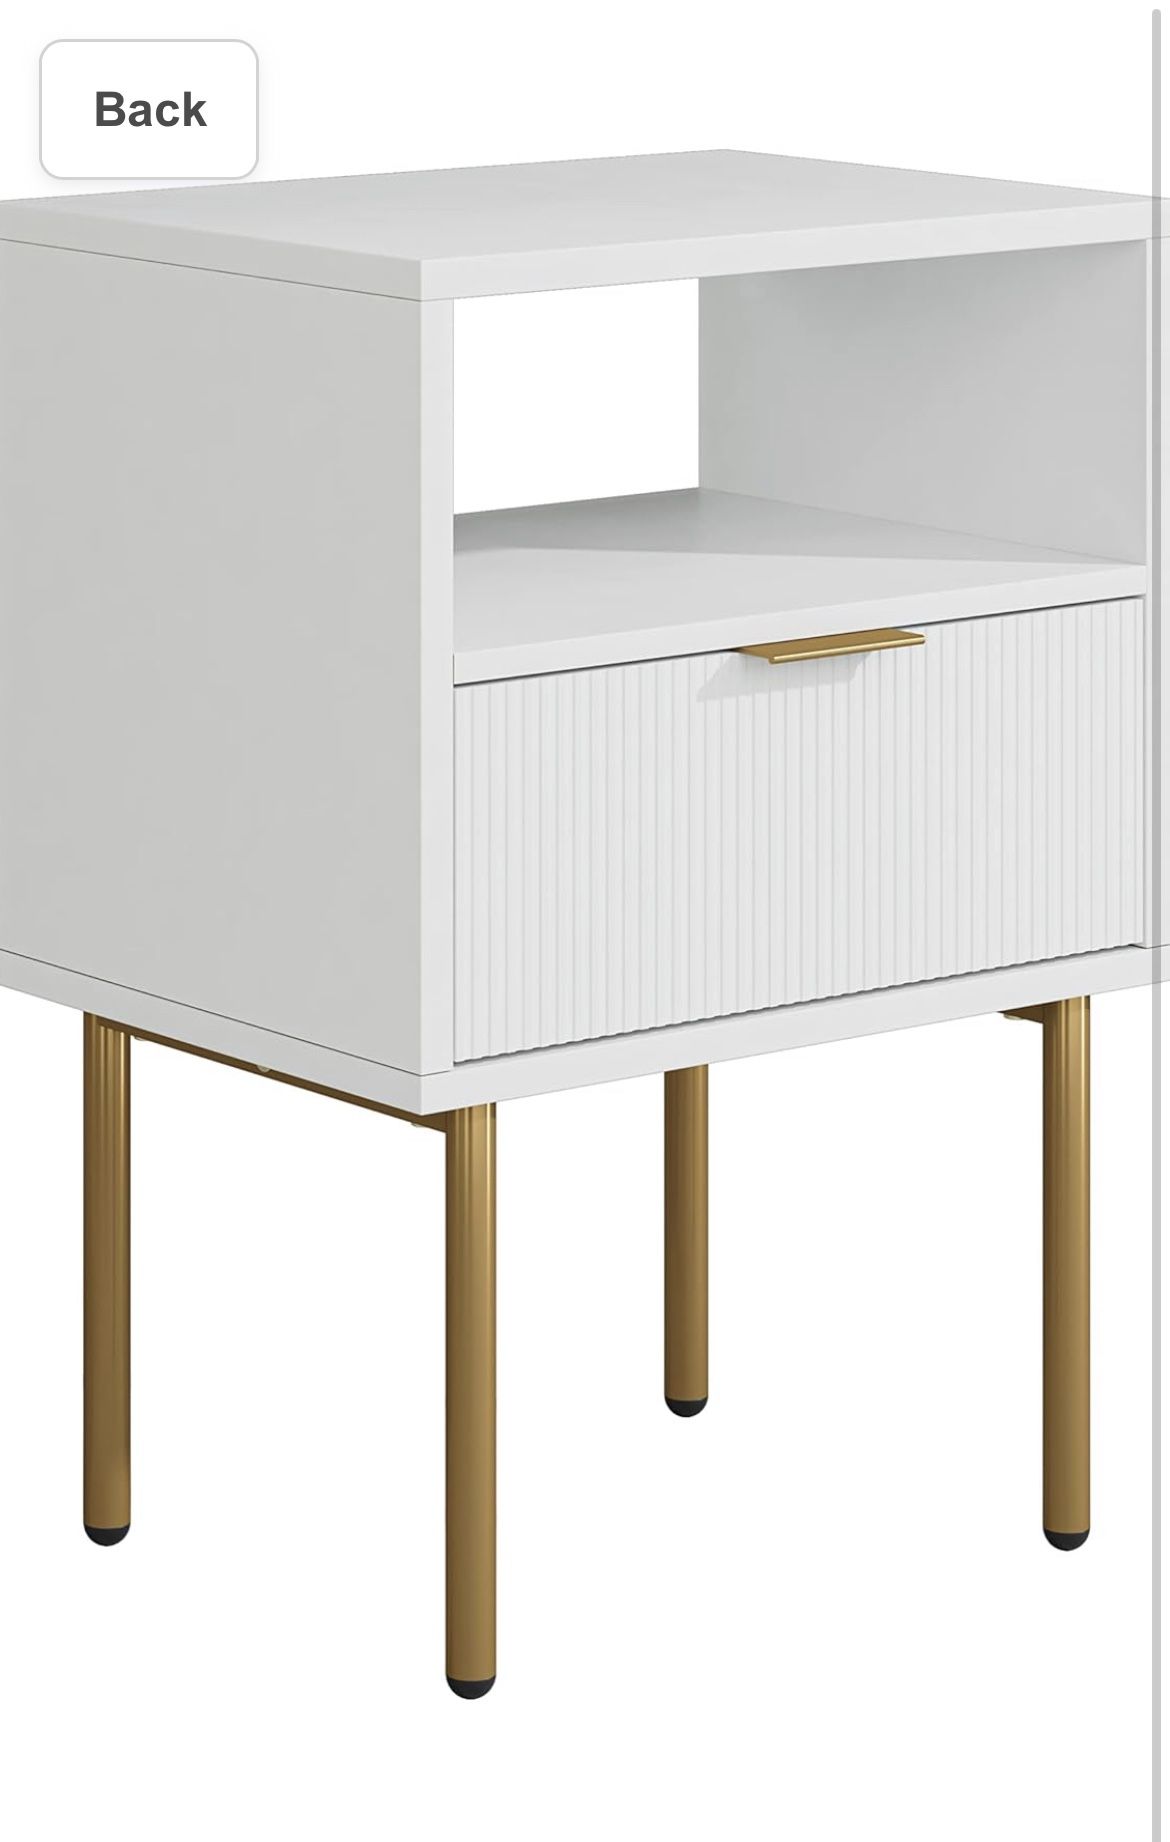 Nightstand,Mid-Century Modern Bedside Table with Storage Drawer and Open Wood Shelf,Small Gold Frame Side Table for Bedroom,Living Room,White